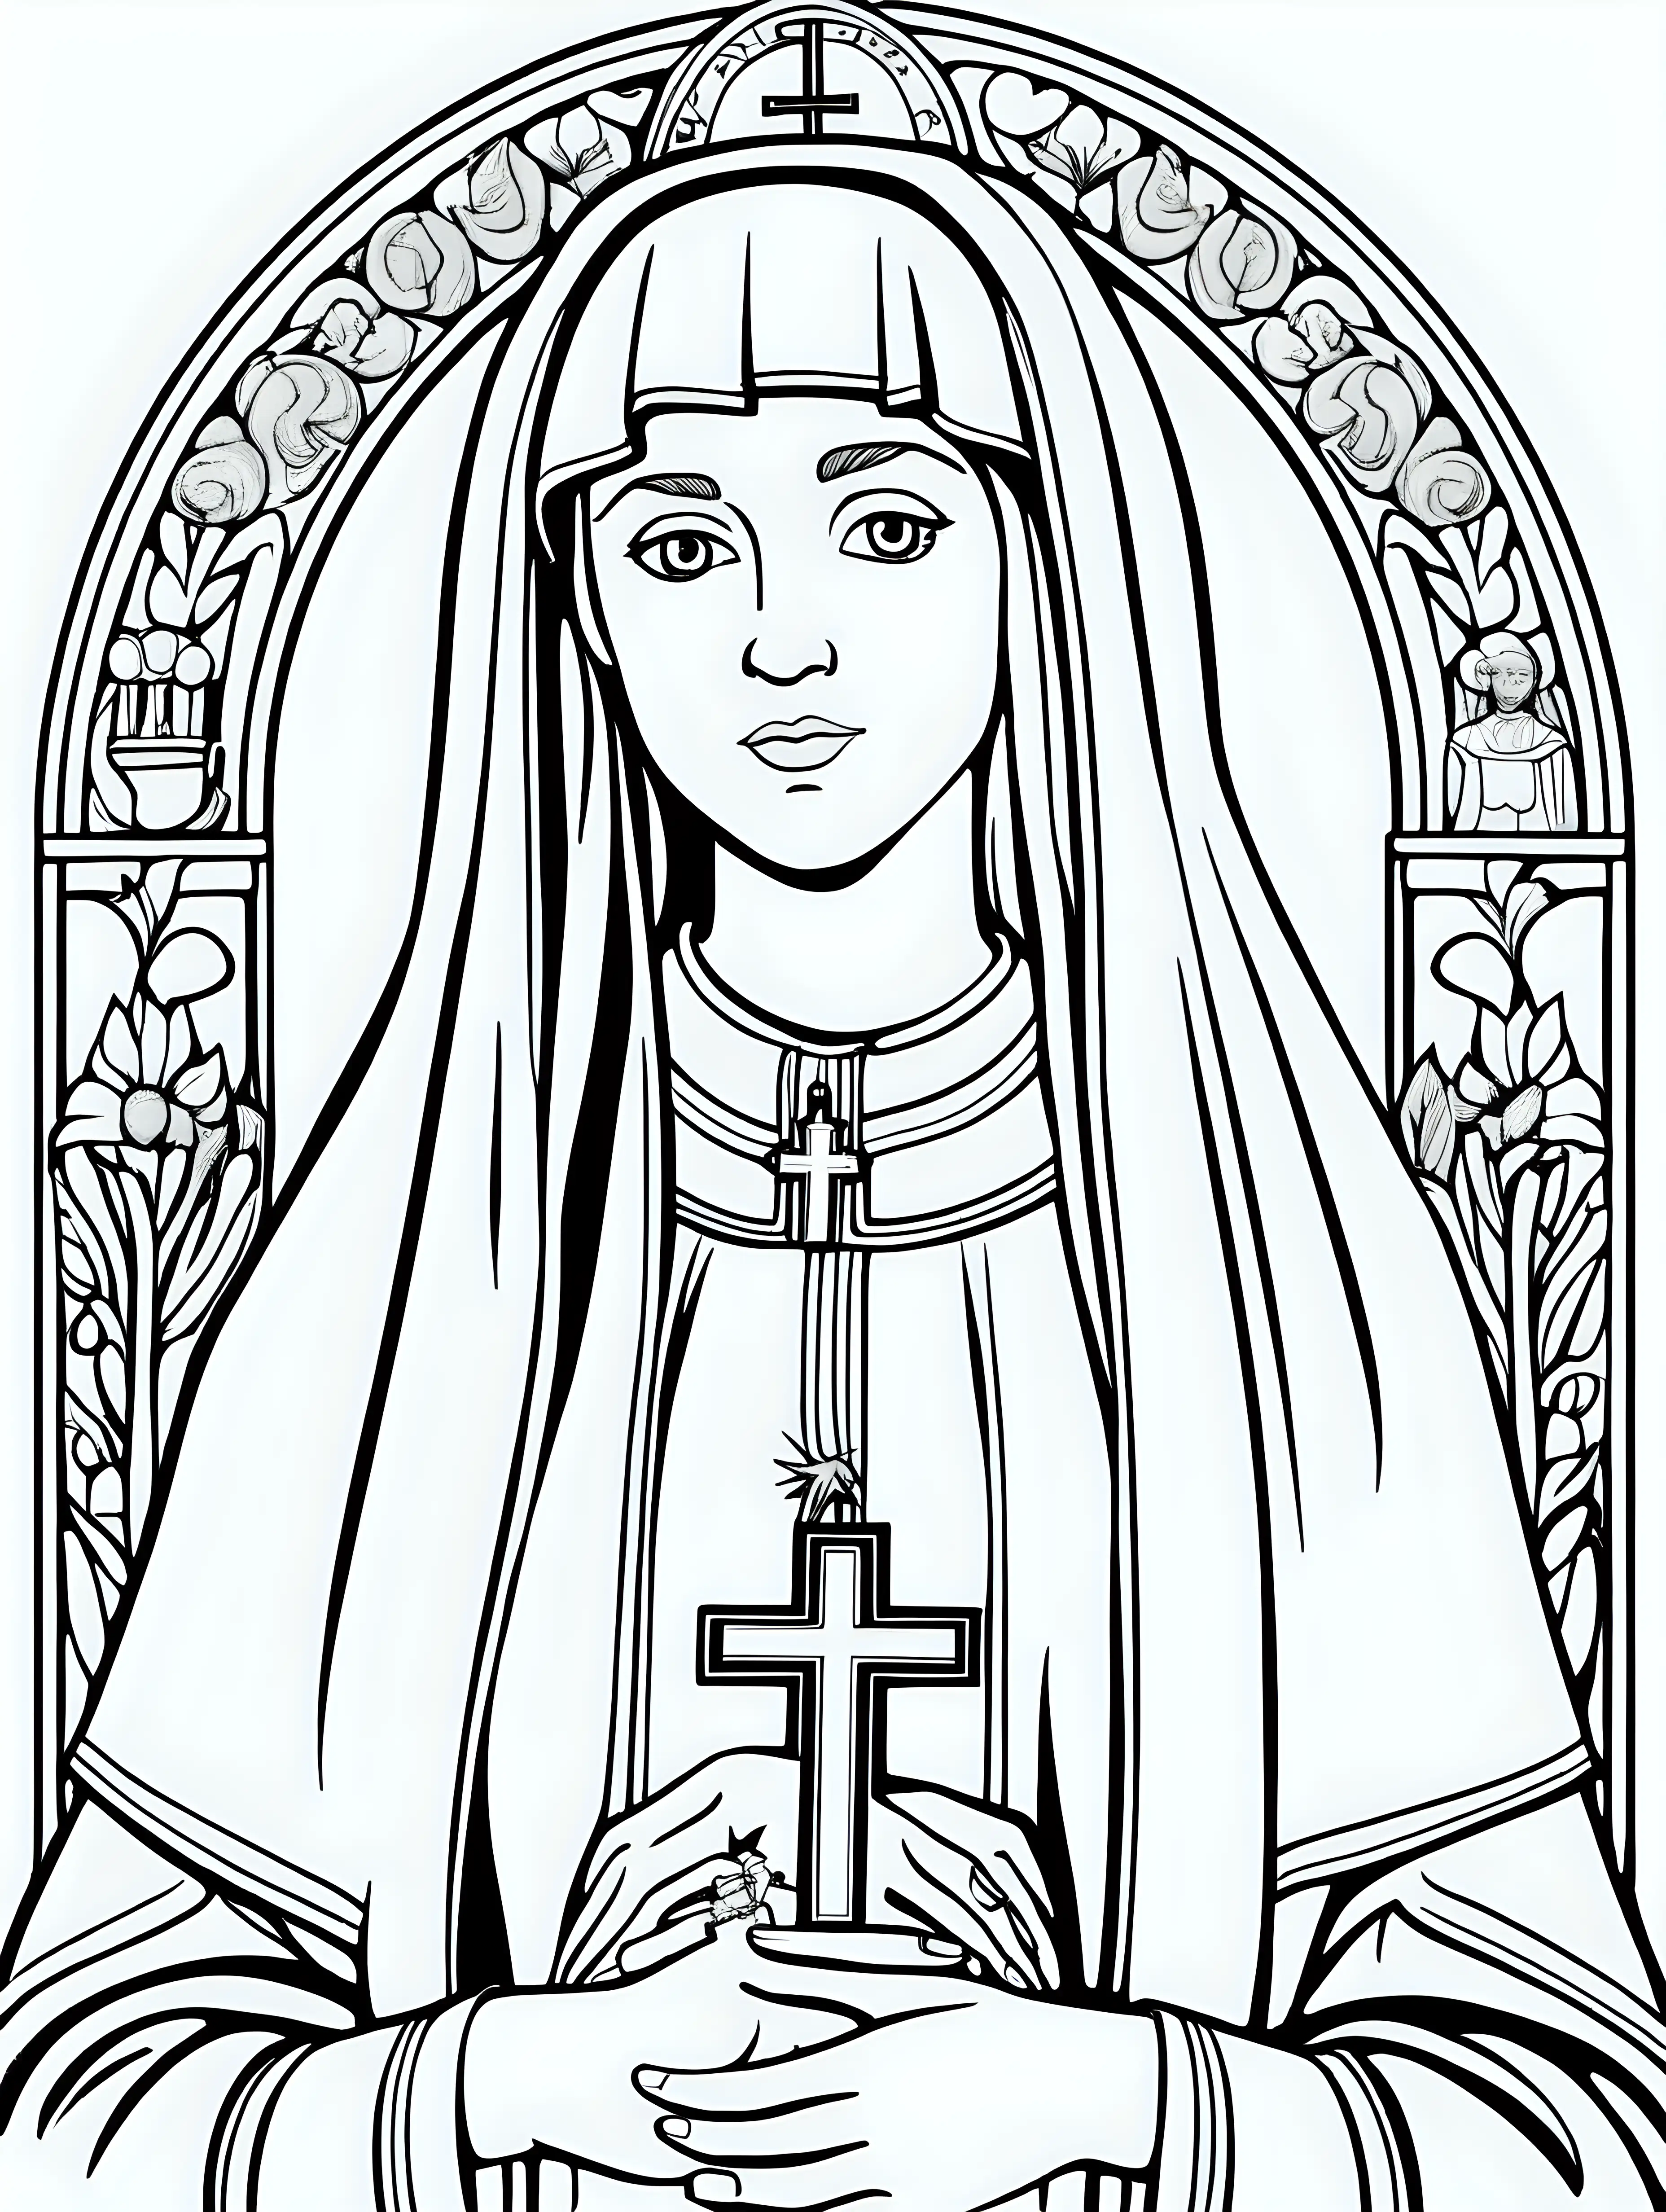 A women in the catholic religion, coloring page, cartoon style, thin lines, few details, no background, no shadows, no greys